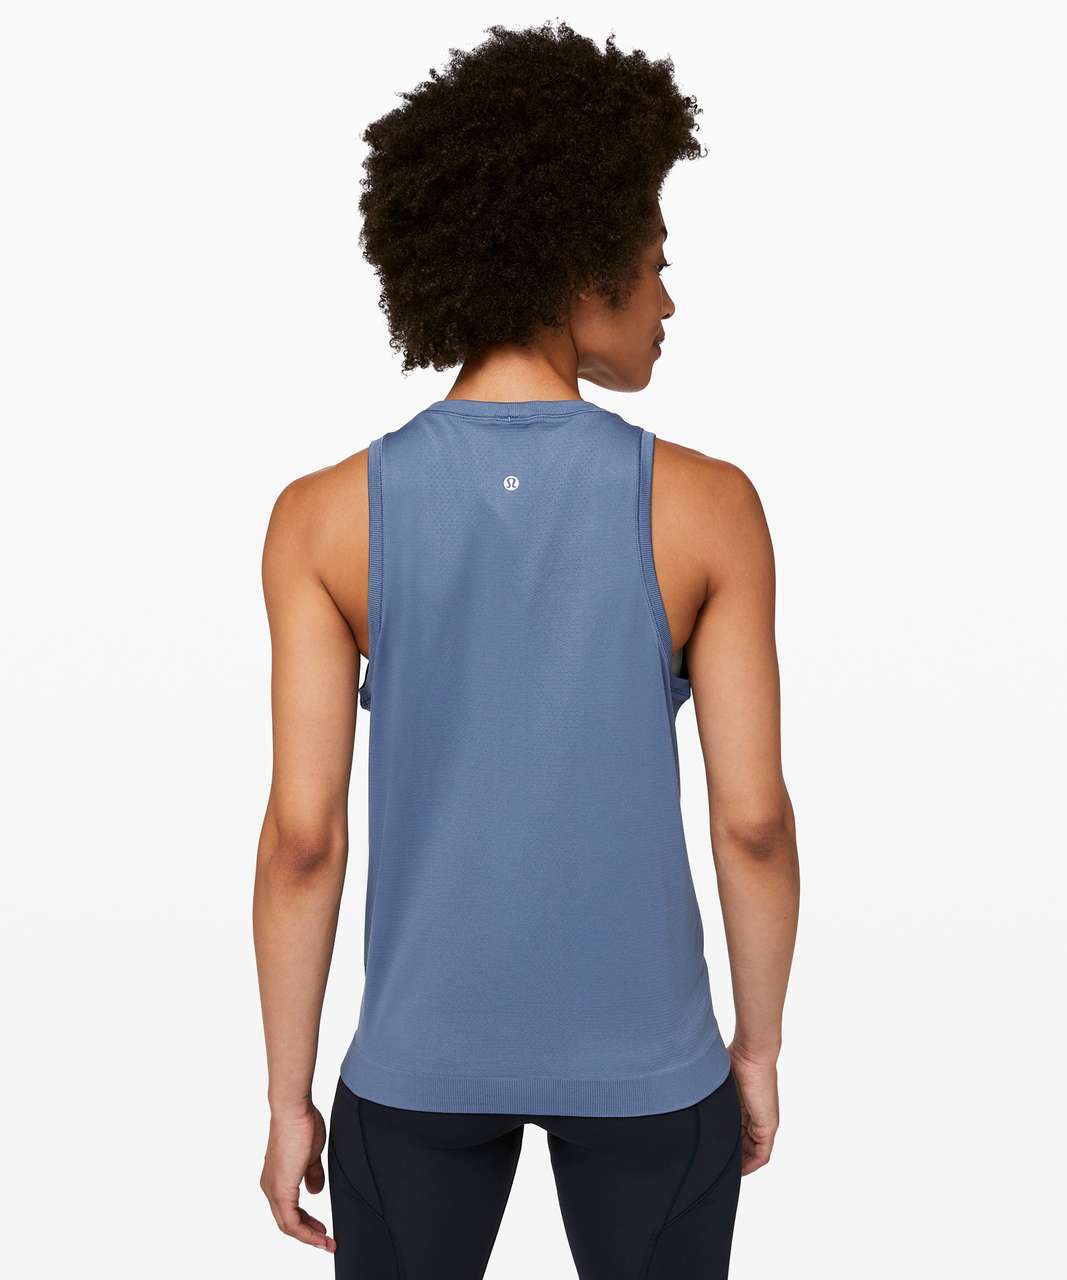 Lululemon Swiftly Breeze Tank *Relaxed Fit - Oasis Blue / Oasis Blue